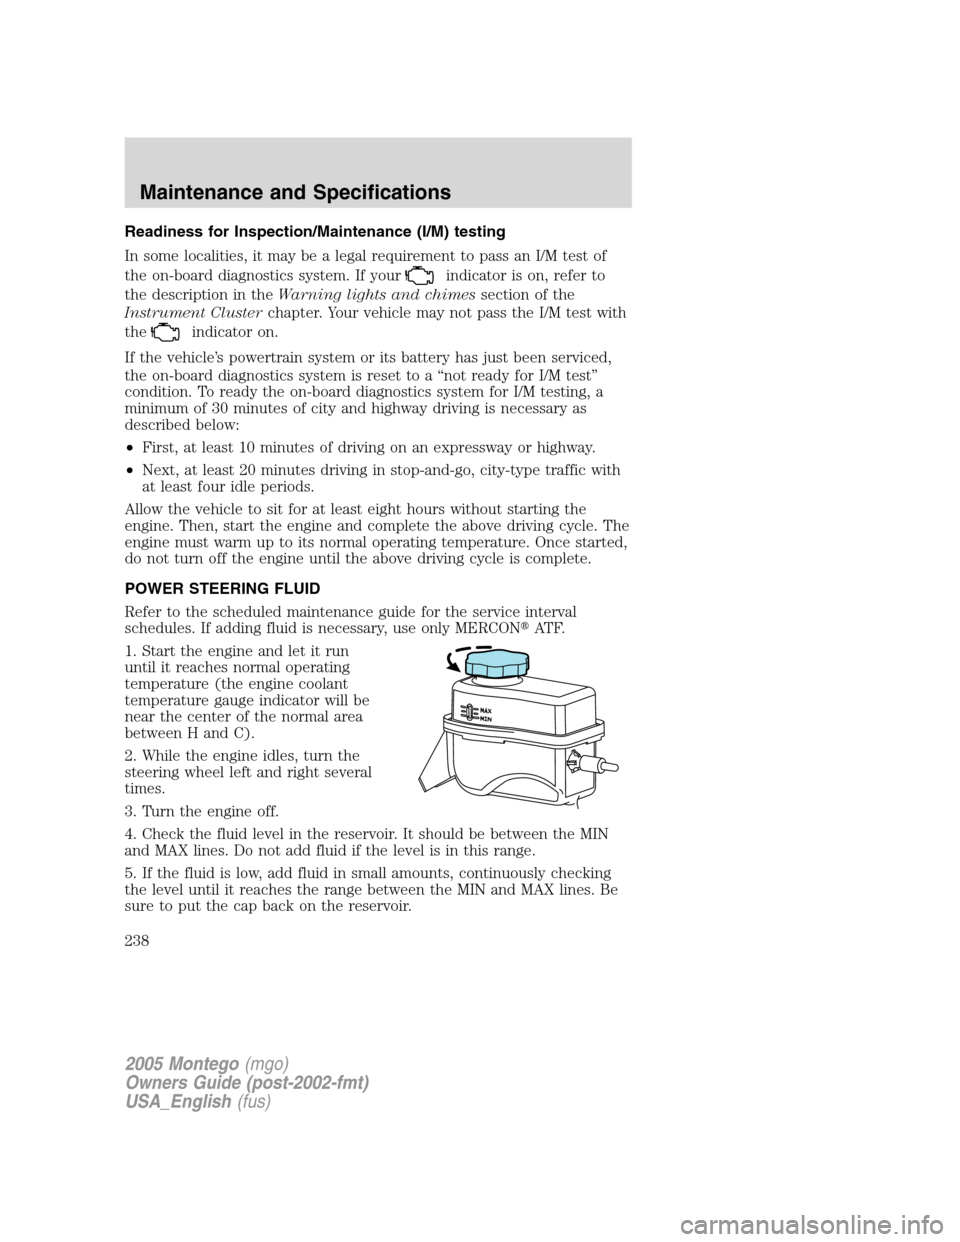 Mercury Montego 2005  s Owners Guide Readiness for Inspection/Maintenance (I/M) testing
In some localities, it may be a legal requirement to pass an I/M test of
the on-board diagnostics system. If your
indicator is on, refer to
the descr